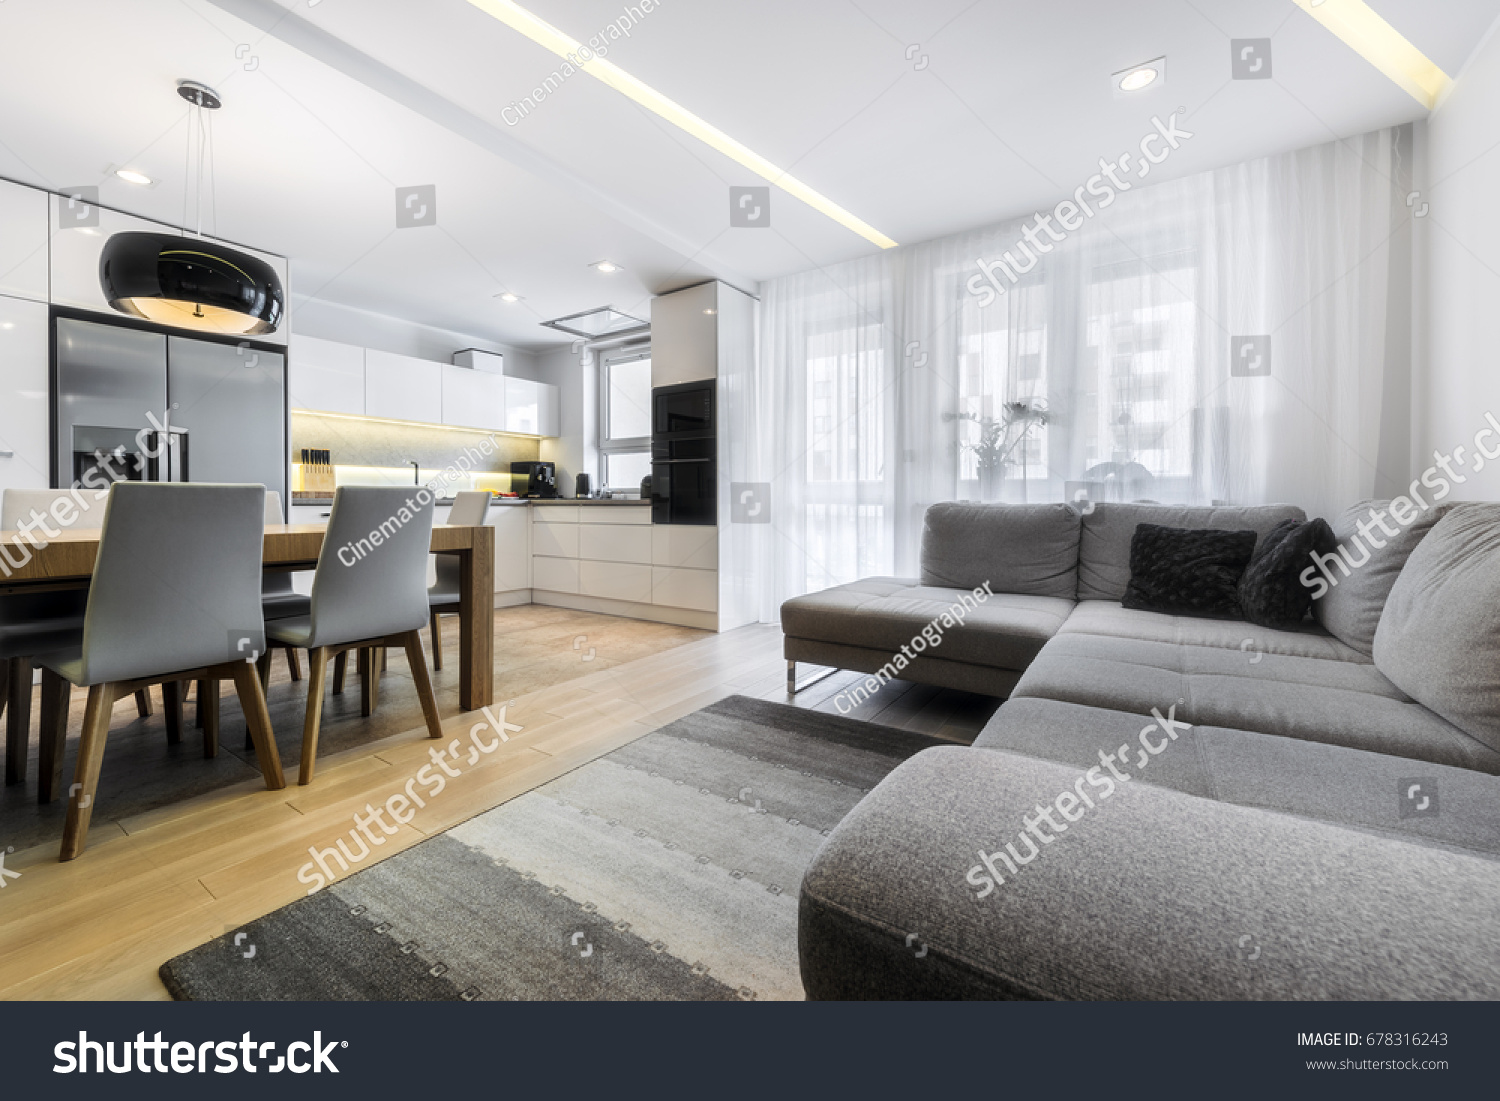 Modern living-room and kitchen in stylish apartment #678316243